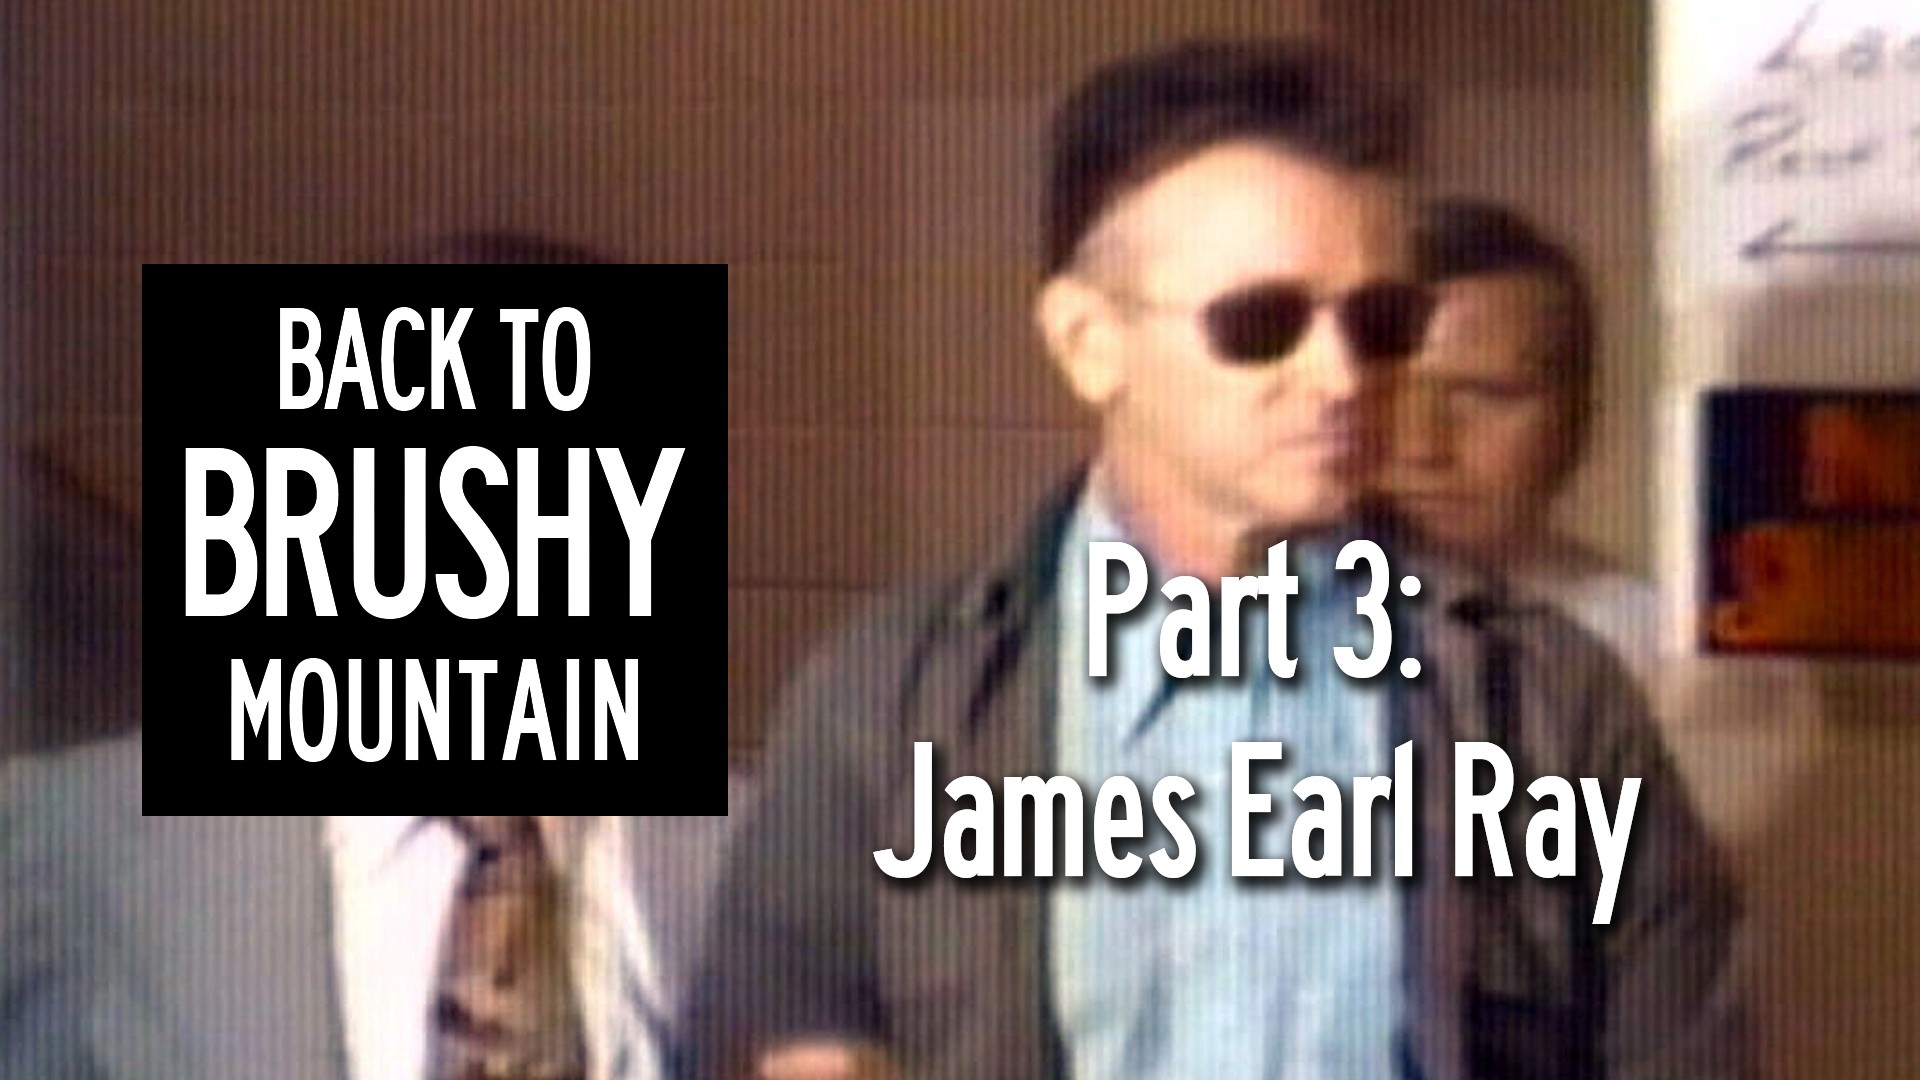 (Video, May 9, 2018) Part 3 of Back to Brushy Mountain looks at the history of James Earl Ray, the prison's most famous and infamous inmate.